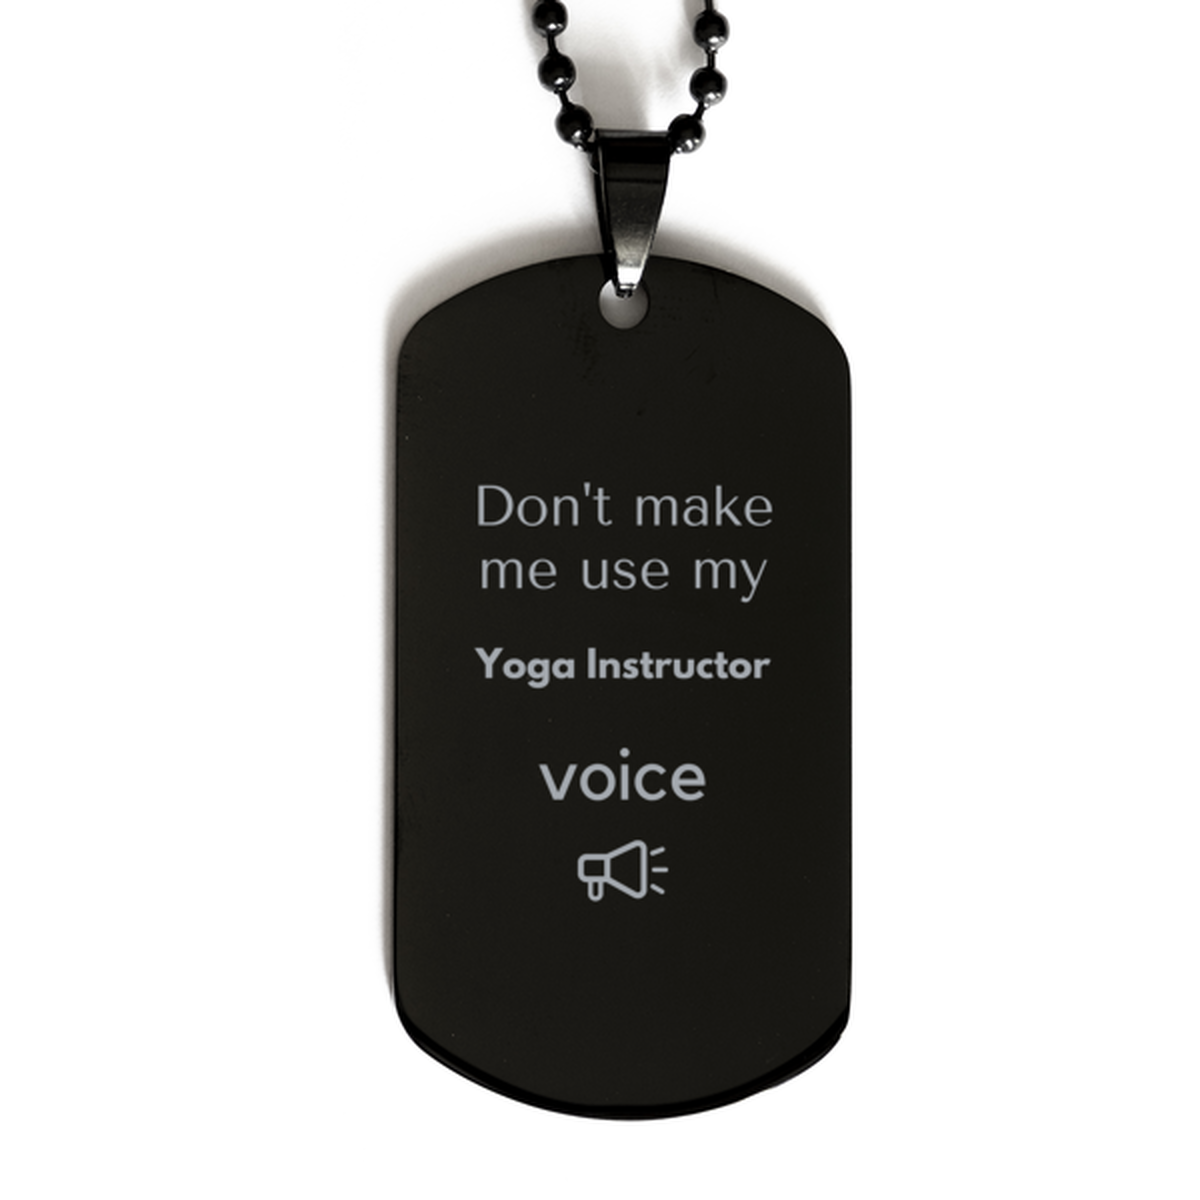 Don't make me use my Yoga Instructor voice, Sarcasm Yoga Instructor Gifts, Christmas Yoga Instructor Black Dog Tag Birthday Unique Gifts For Yoga Instructor Coworkers, Men, Women, Colleague, Friends